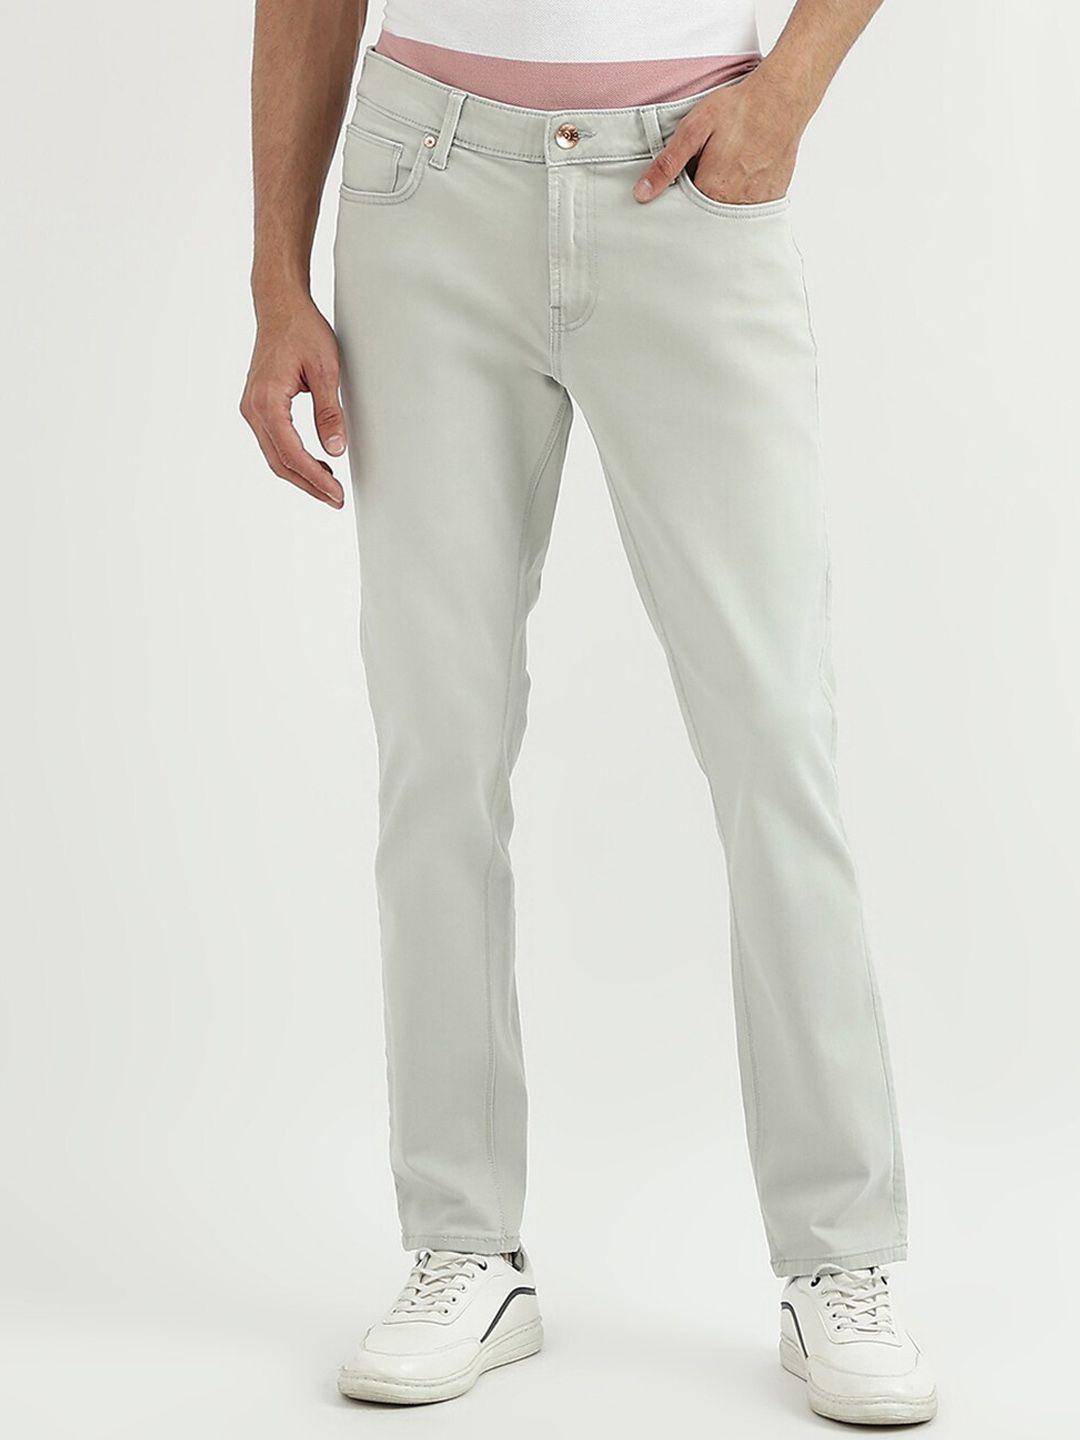 united colors of benetton men off white skinny fit jeans